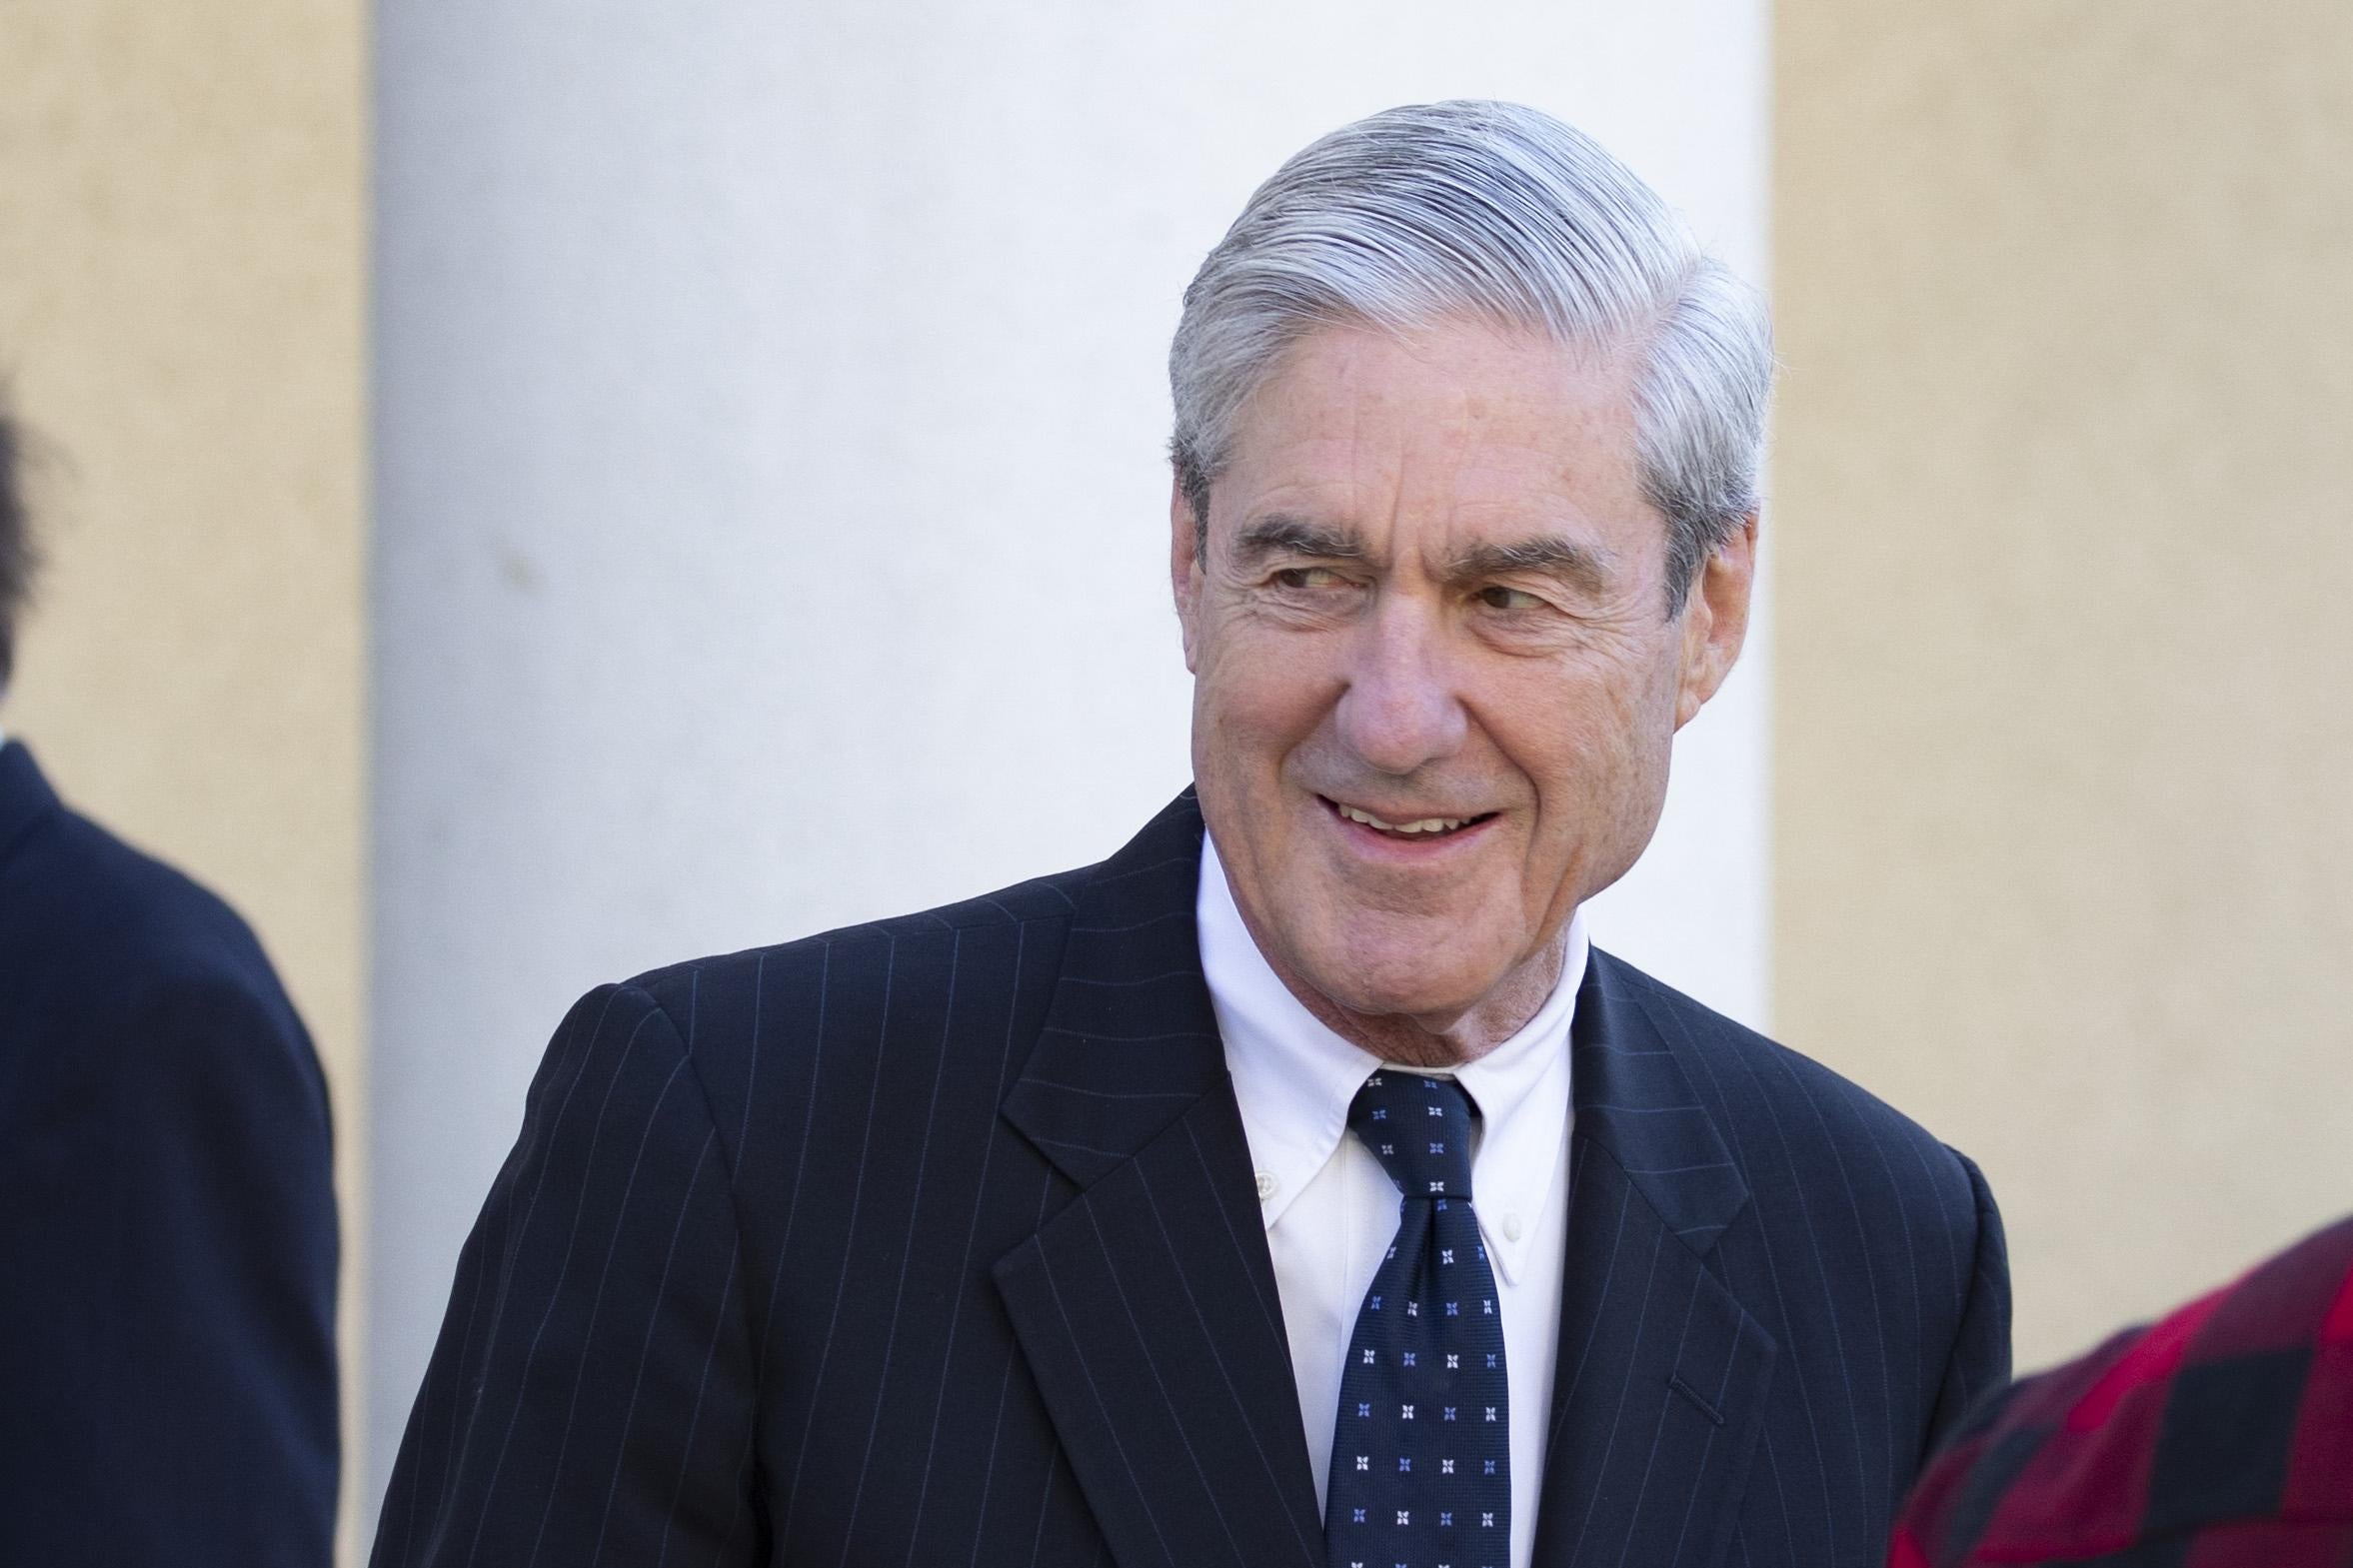 Special Counsel Robert Mueller walks after attending church on March 24, 2019 in Washington, D.C.